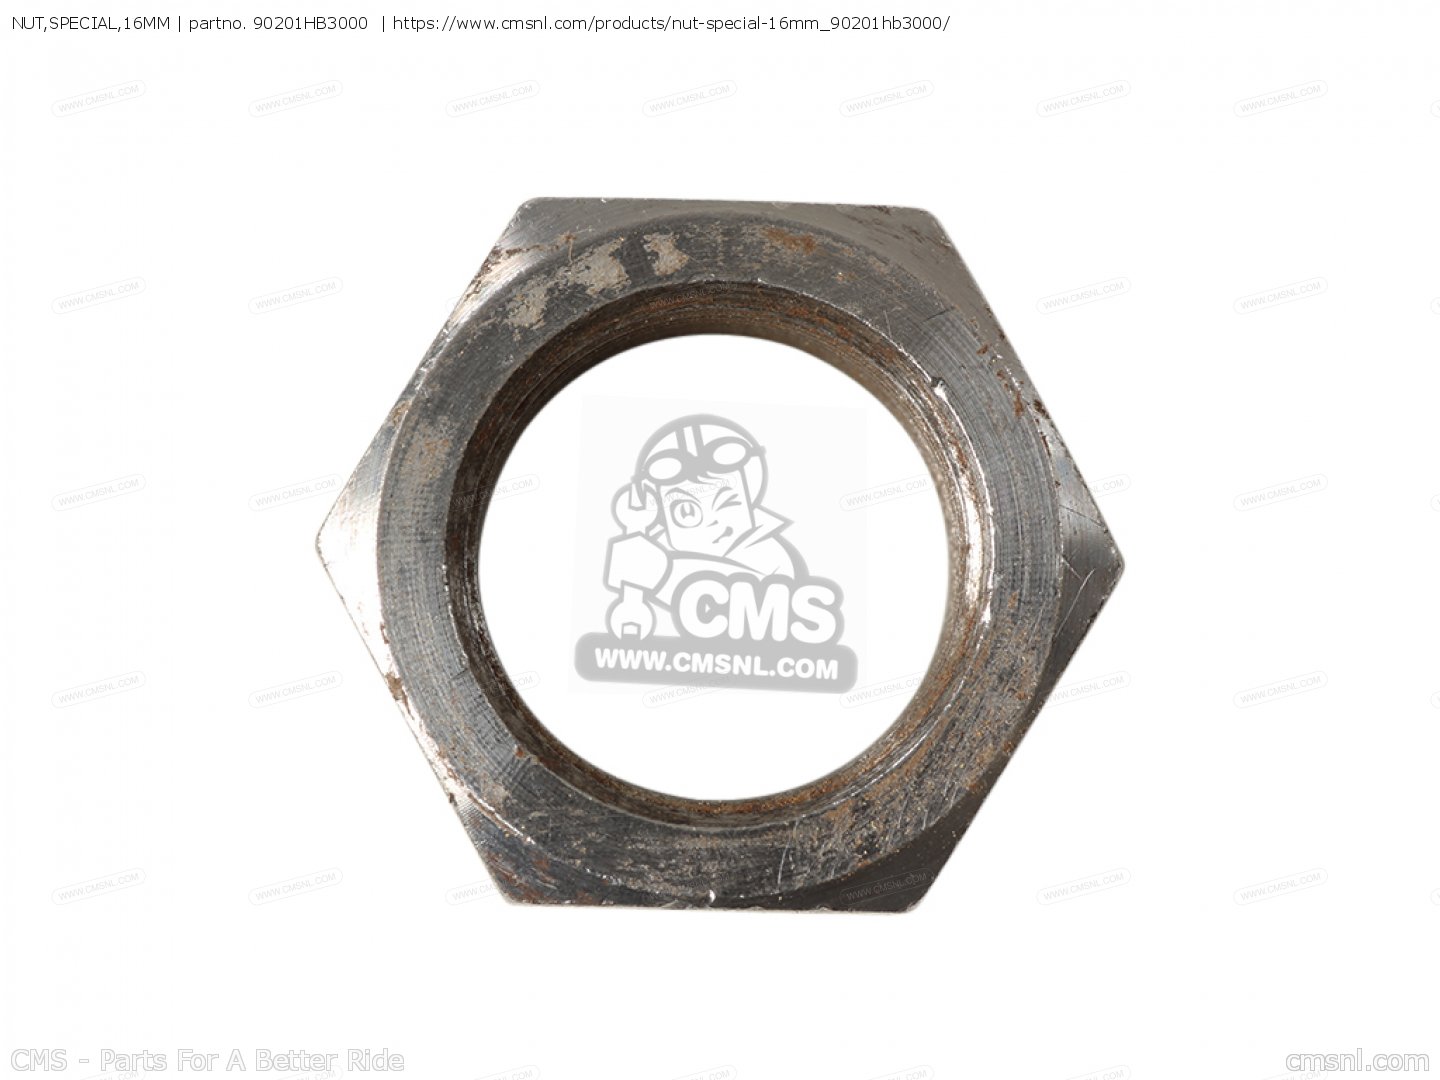 NUT,SPECIAL,16MM | partno. 90201HB3000  | https://www.cmsnl.com/products/nut-special-16mm_90201hb3000/
CMS – Parts For A Better Ride
cmsnl.com